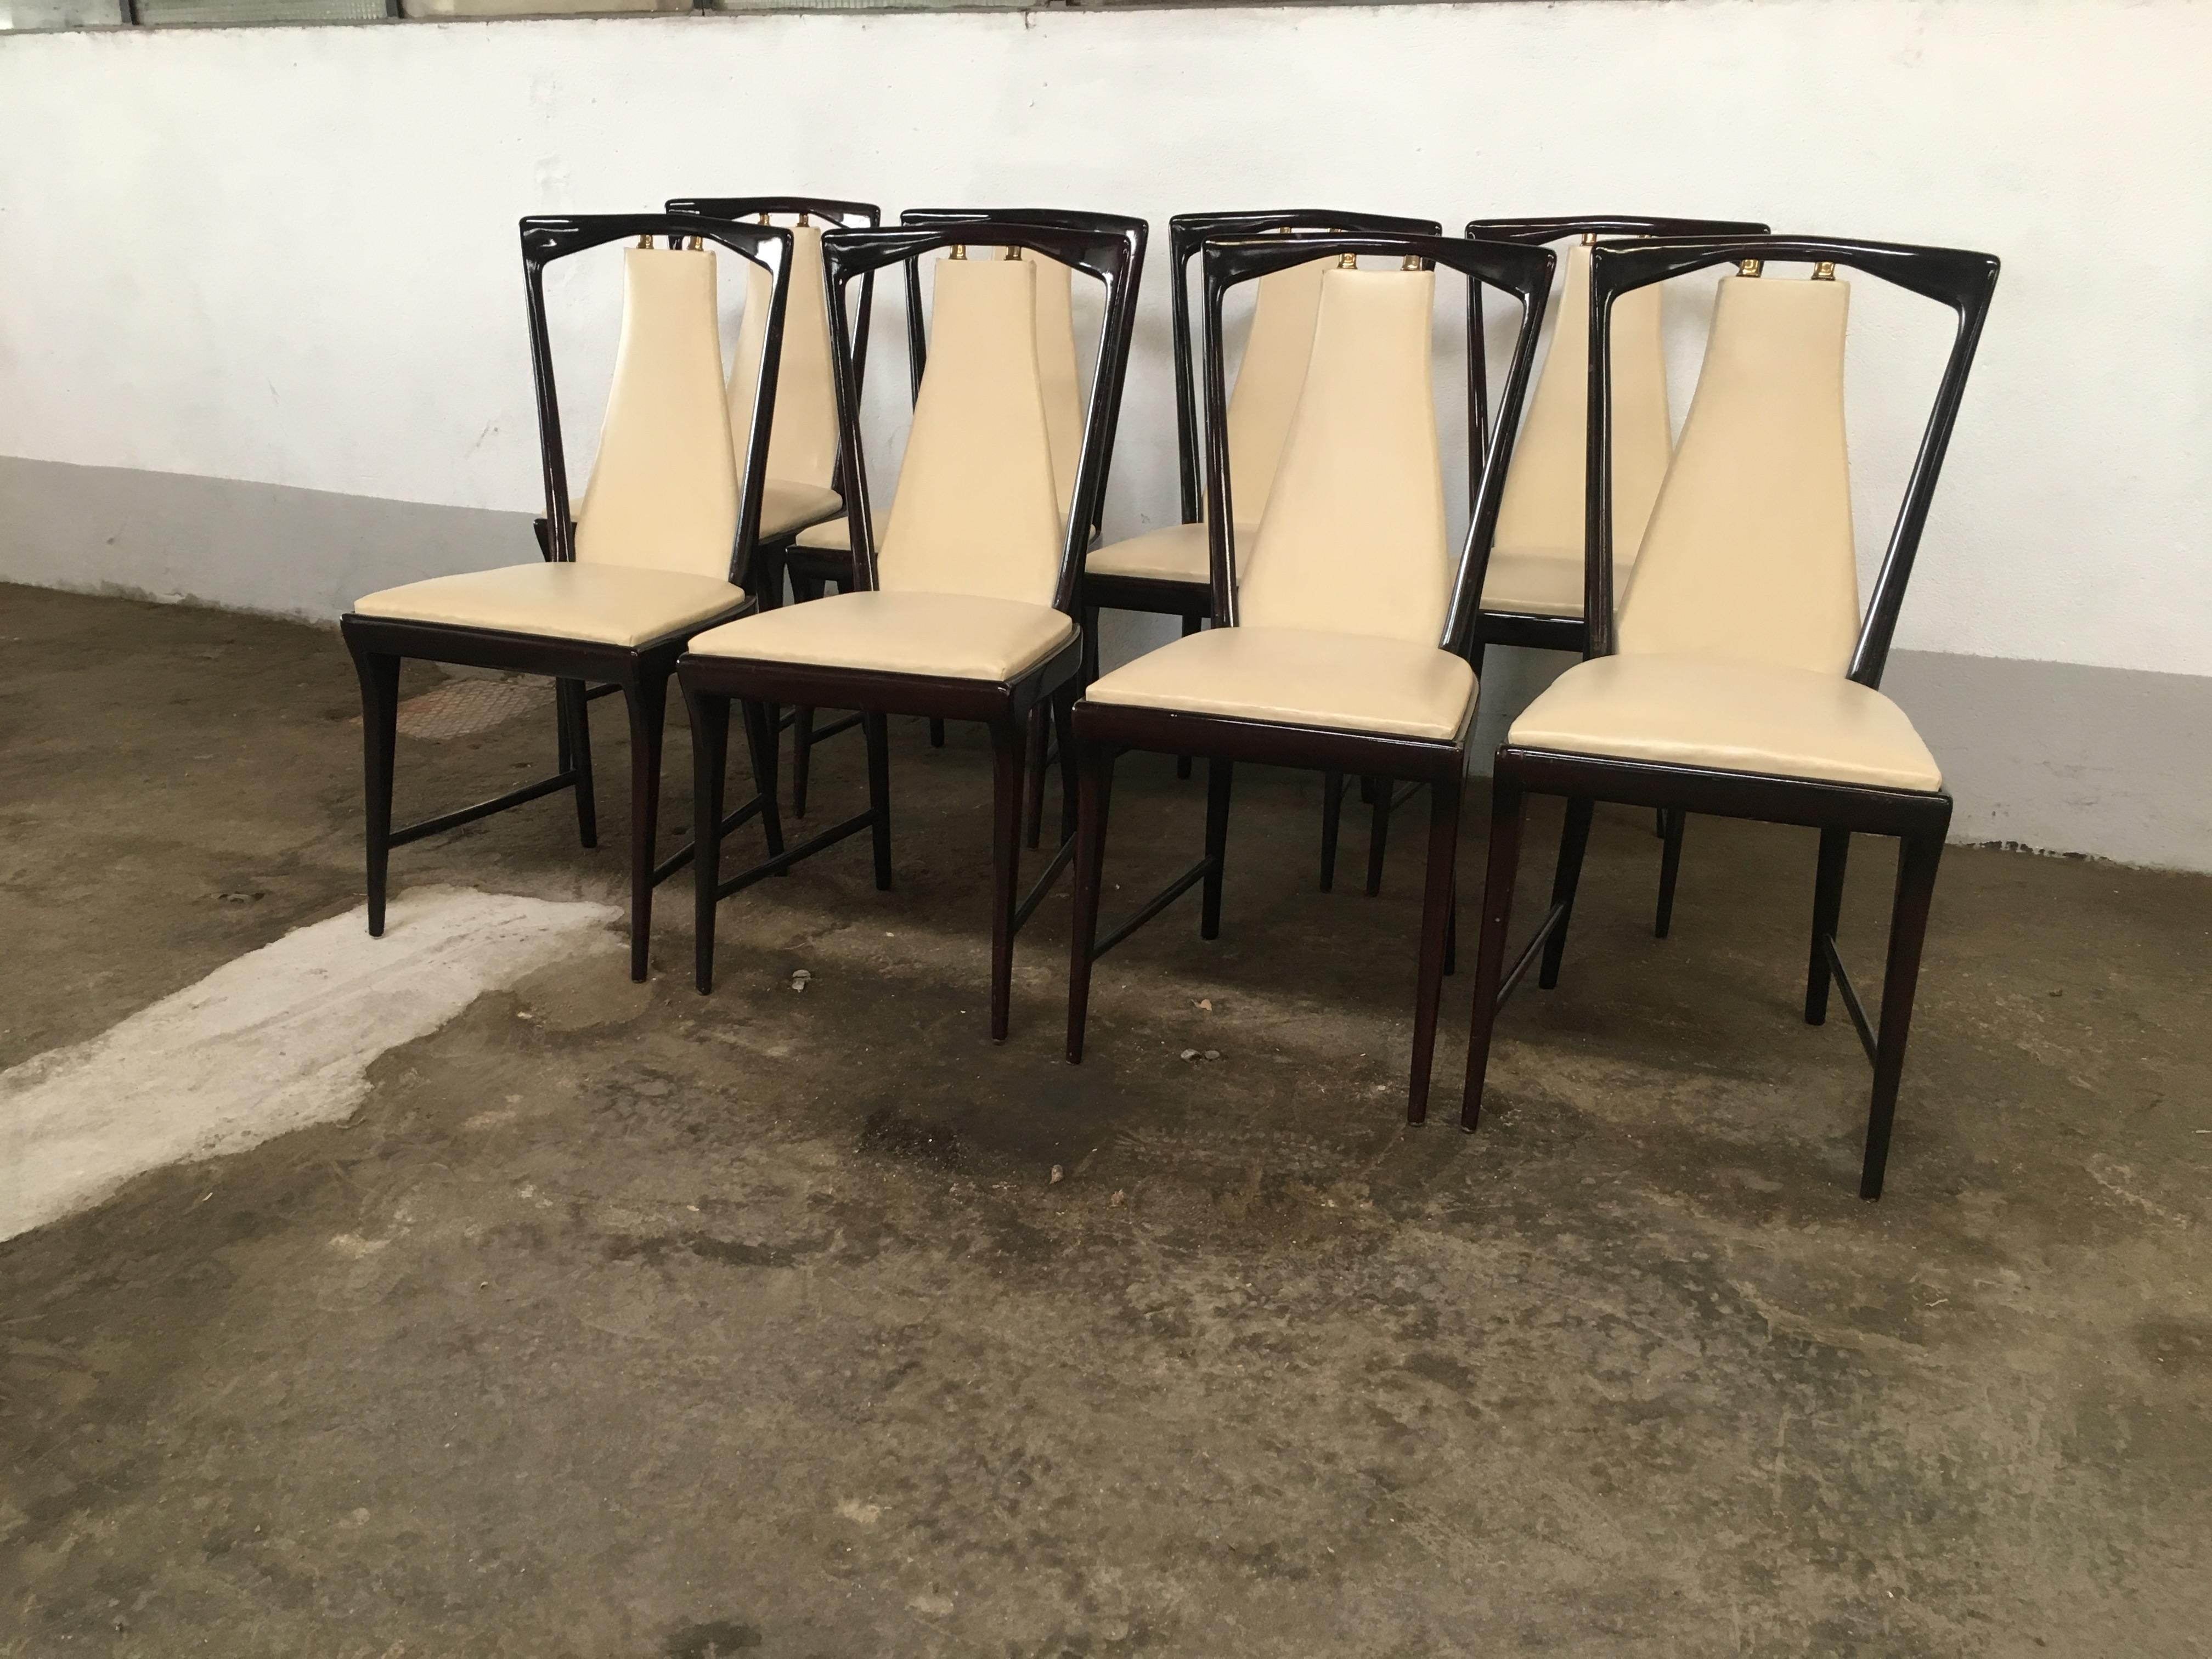 Mid-Century Modern set of 8 Osvaldo Borsani mahogany and faux leather Italian dining chairs with brass details from 1950s
The chairs could be matched with their Dining Table and are a part of a complete dining room set as shown in the photos.
 